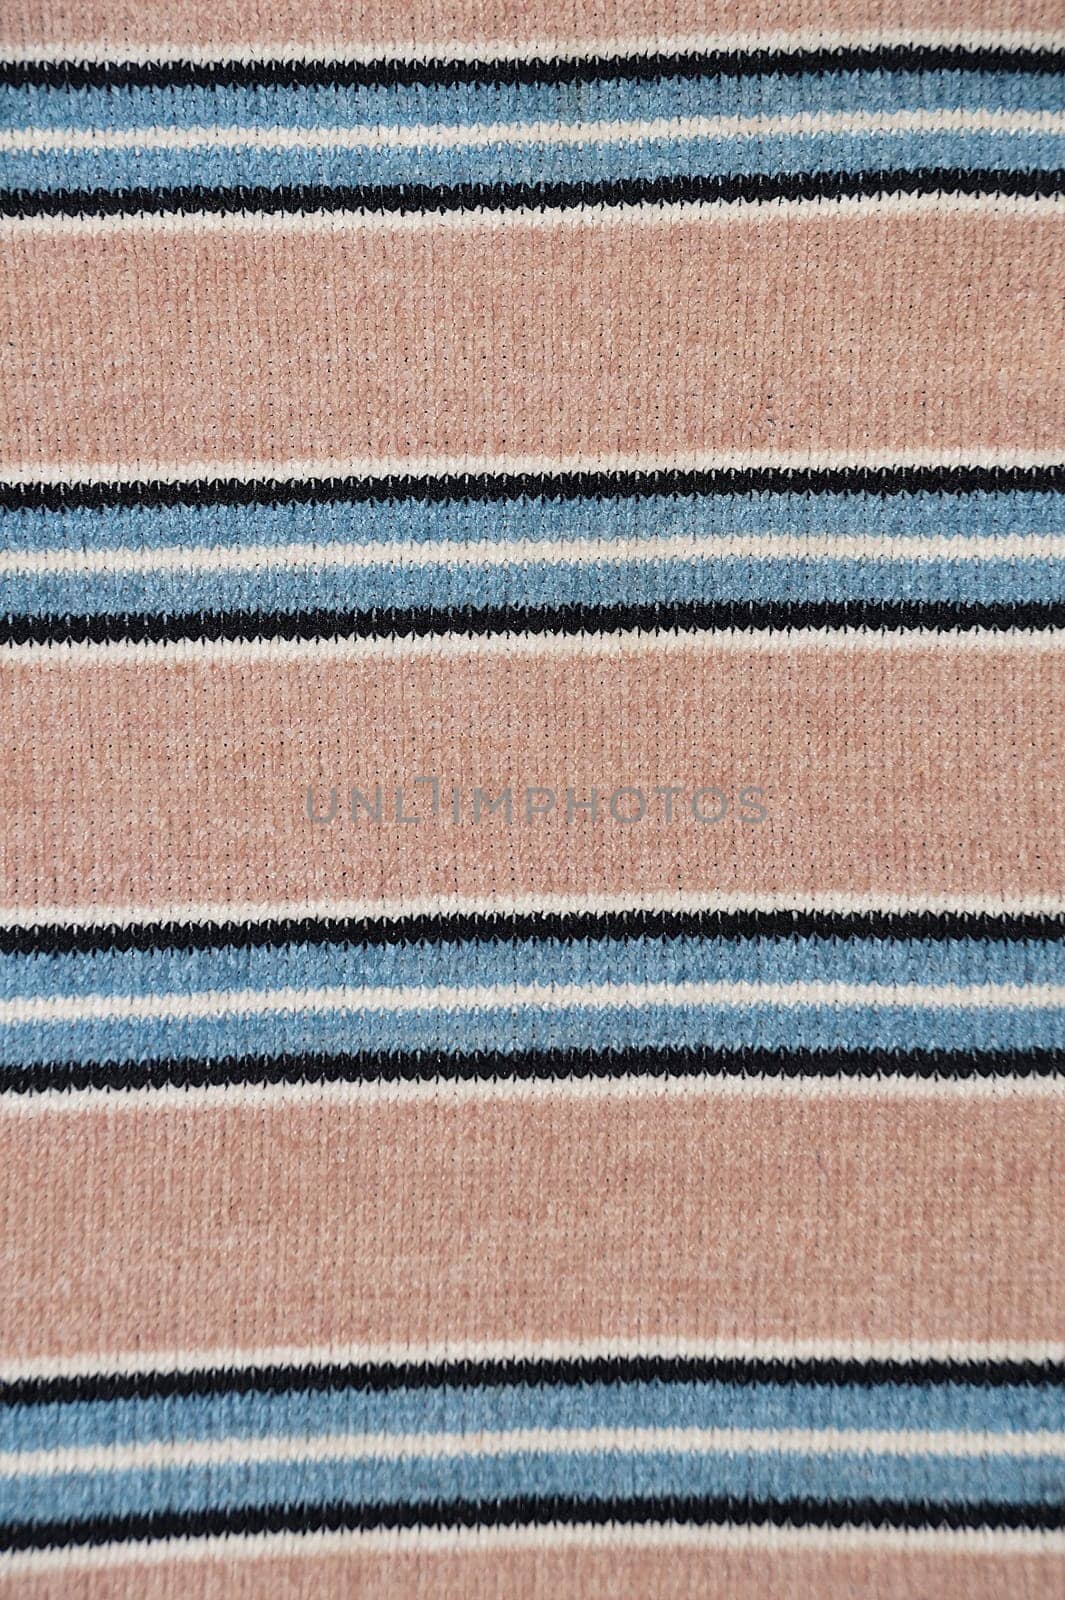 Knitted material closeup with striped pattern in beige, blue and black colors for textile striped background